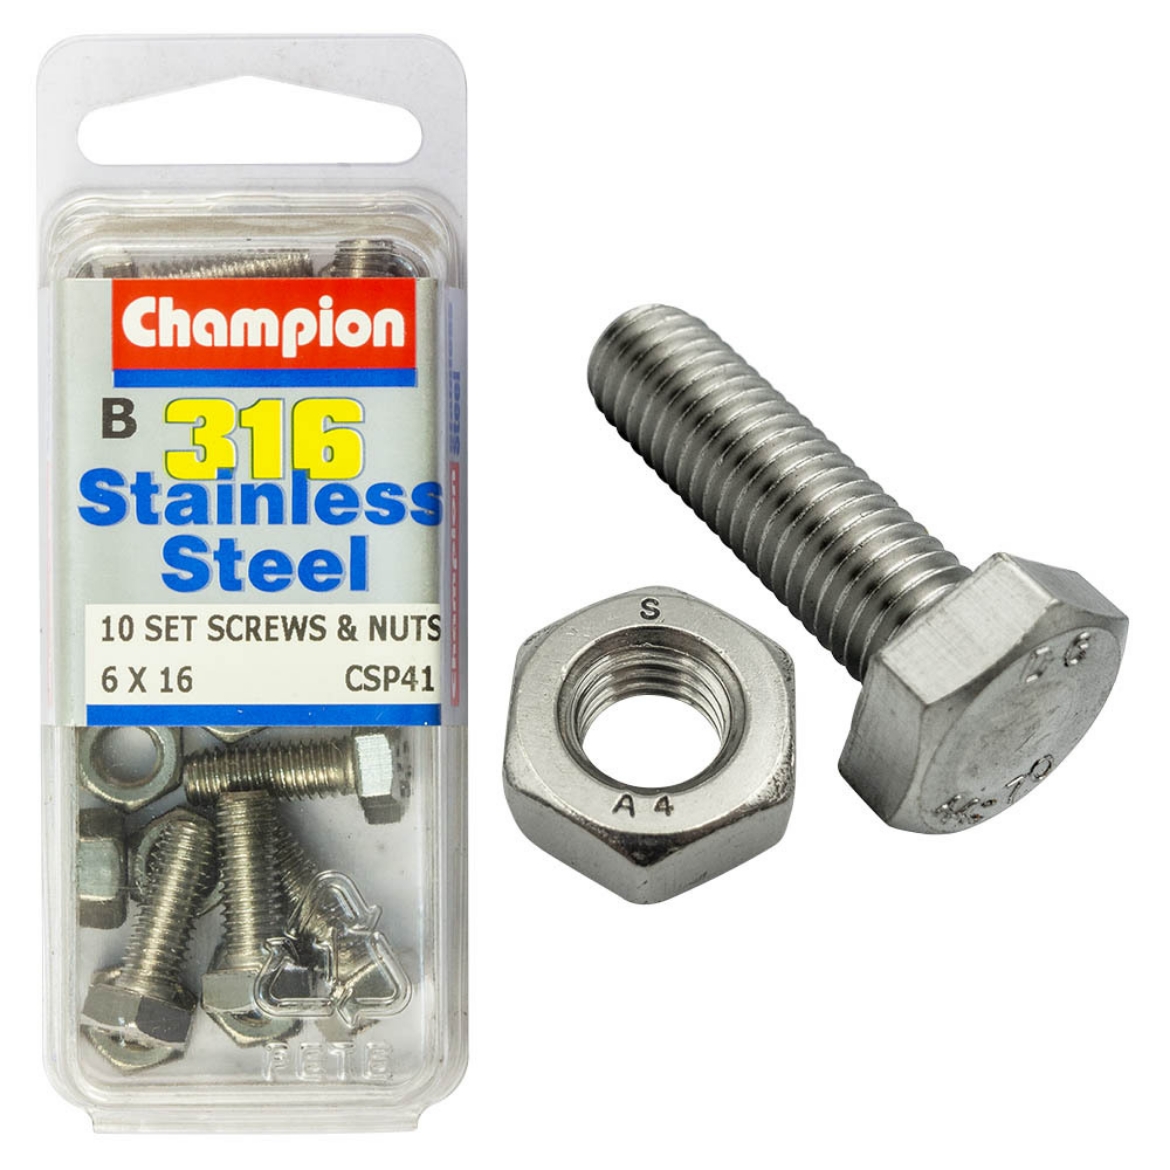 Picture of SET SCREWS & NUTS  6 x 16 (Pkt.10)